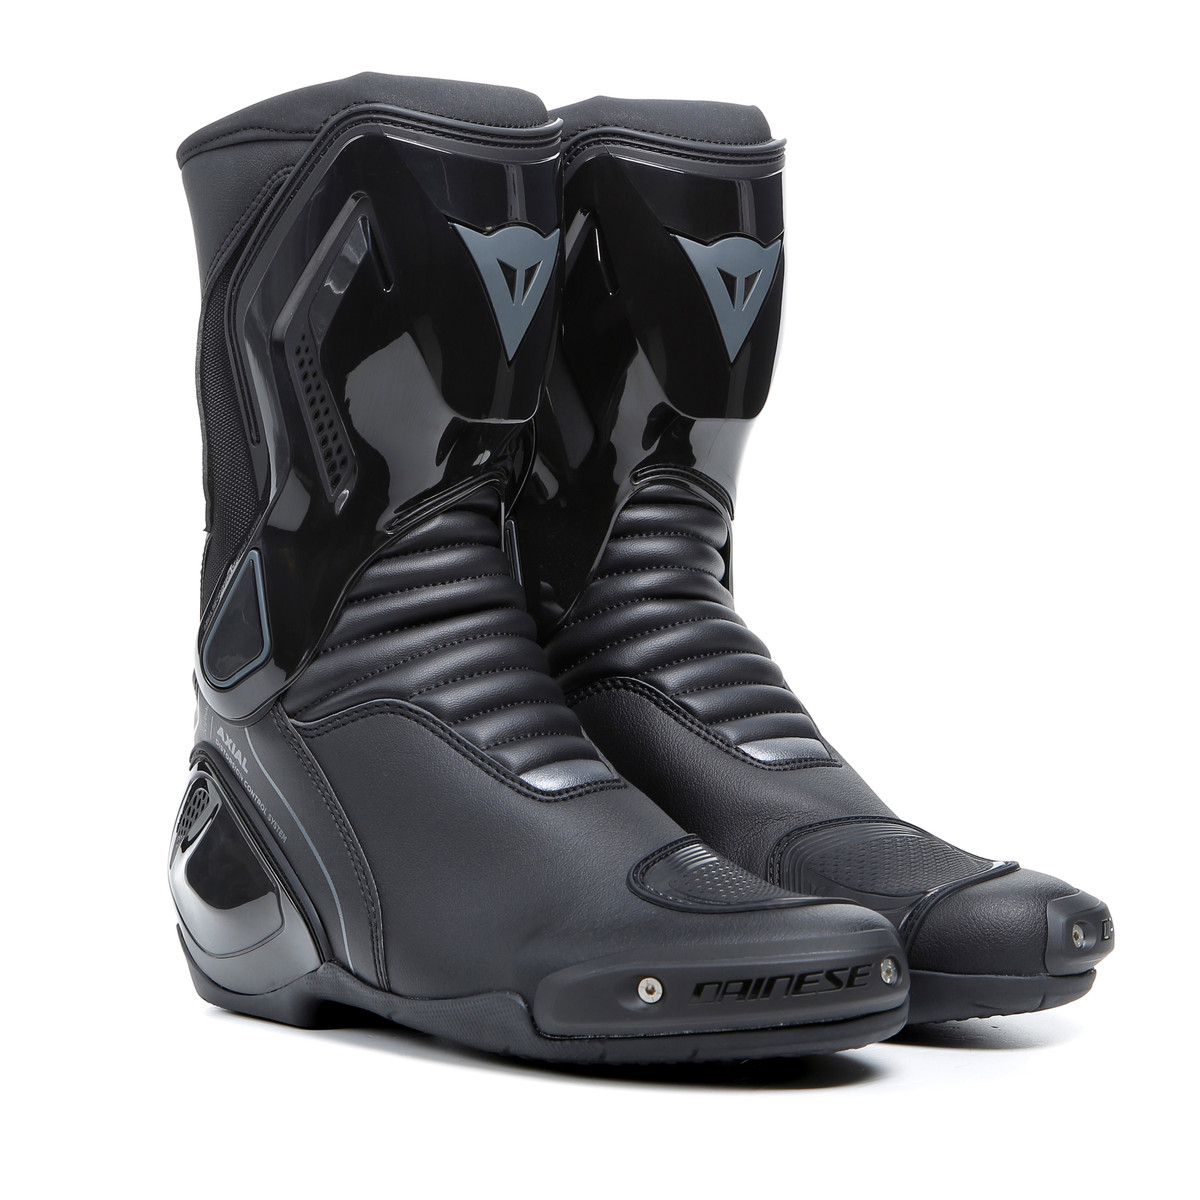 Image of Dainese Nexus 2 Boots Black Size 39 ID 8051019292483